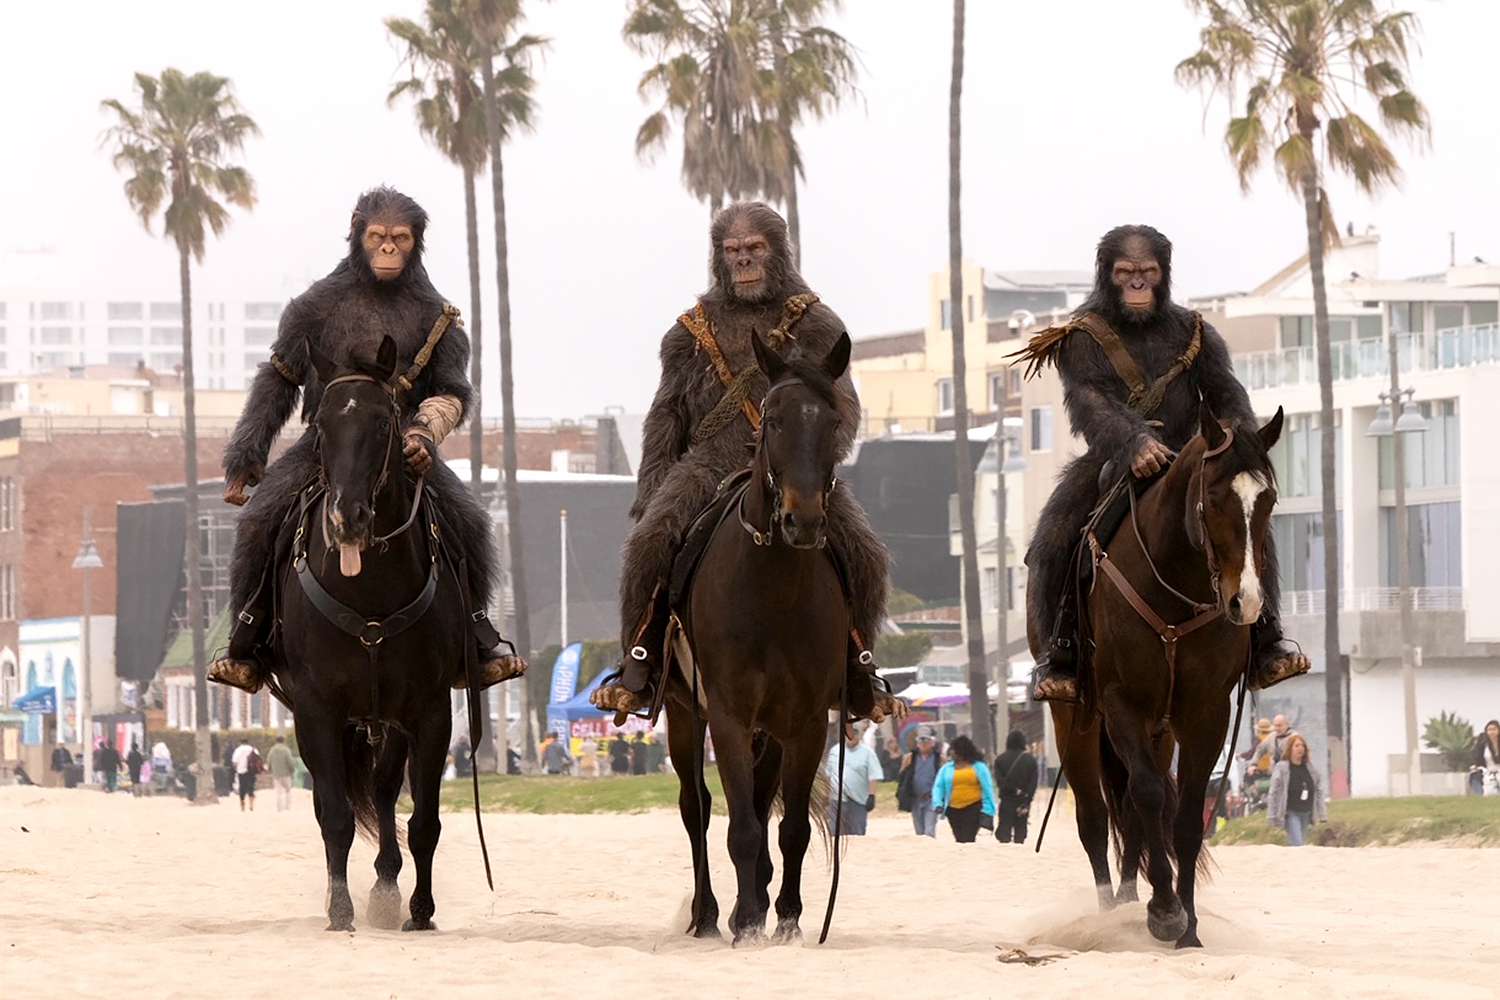 ‘Planet of the Apes’ Characters Appear on Horseback in Venice Beach [Video]